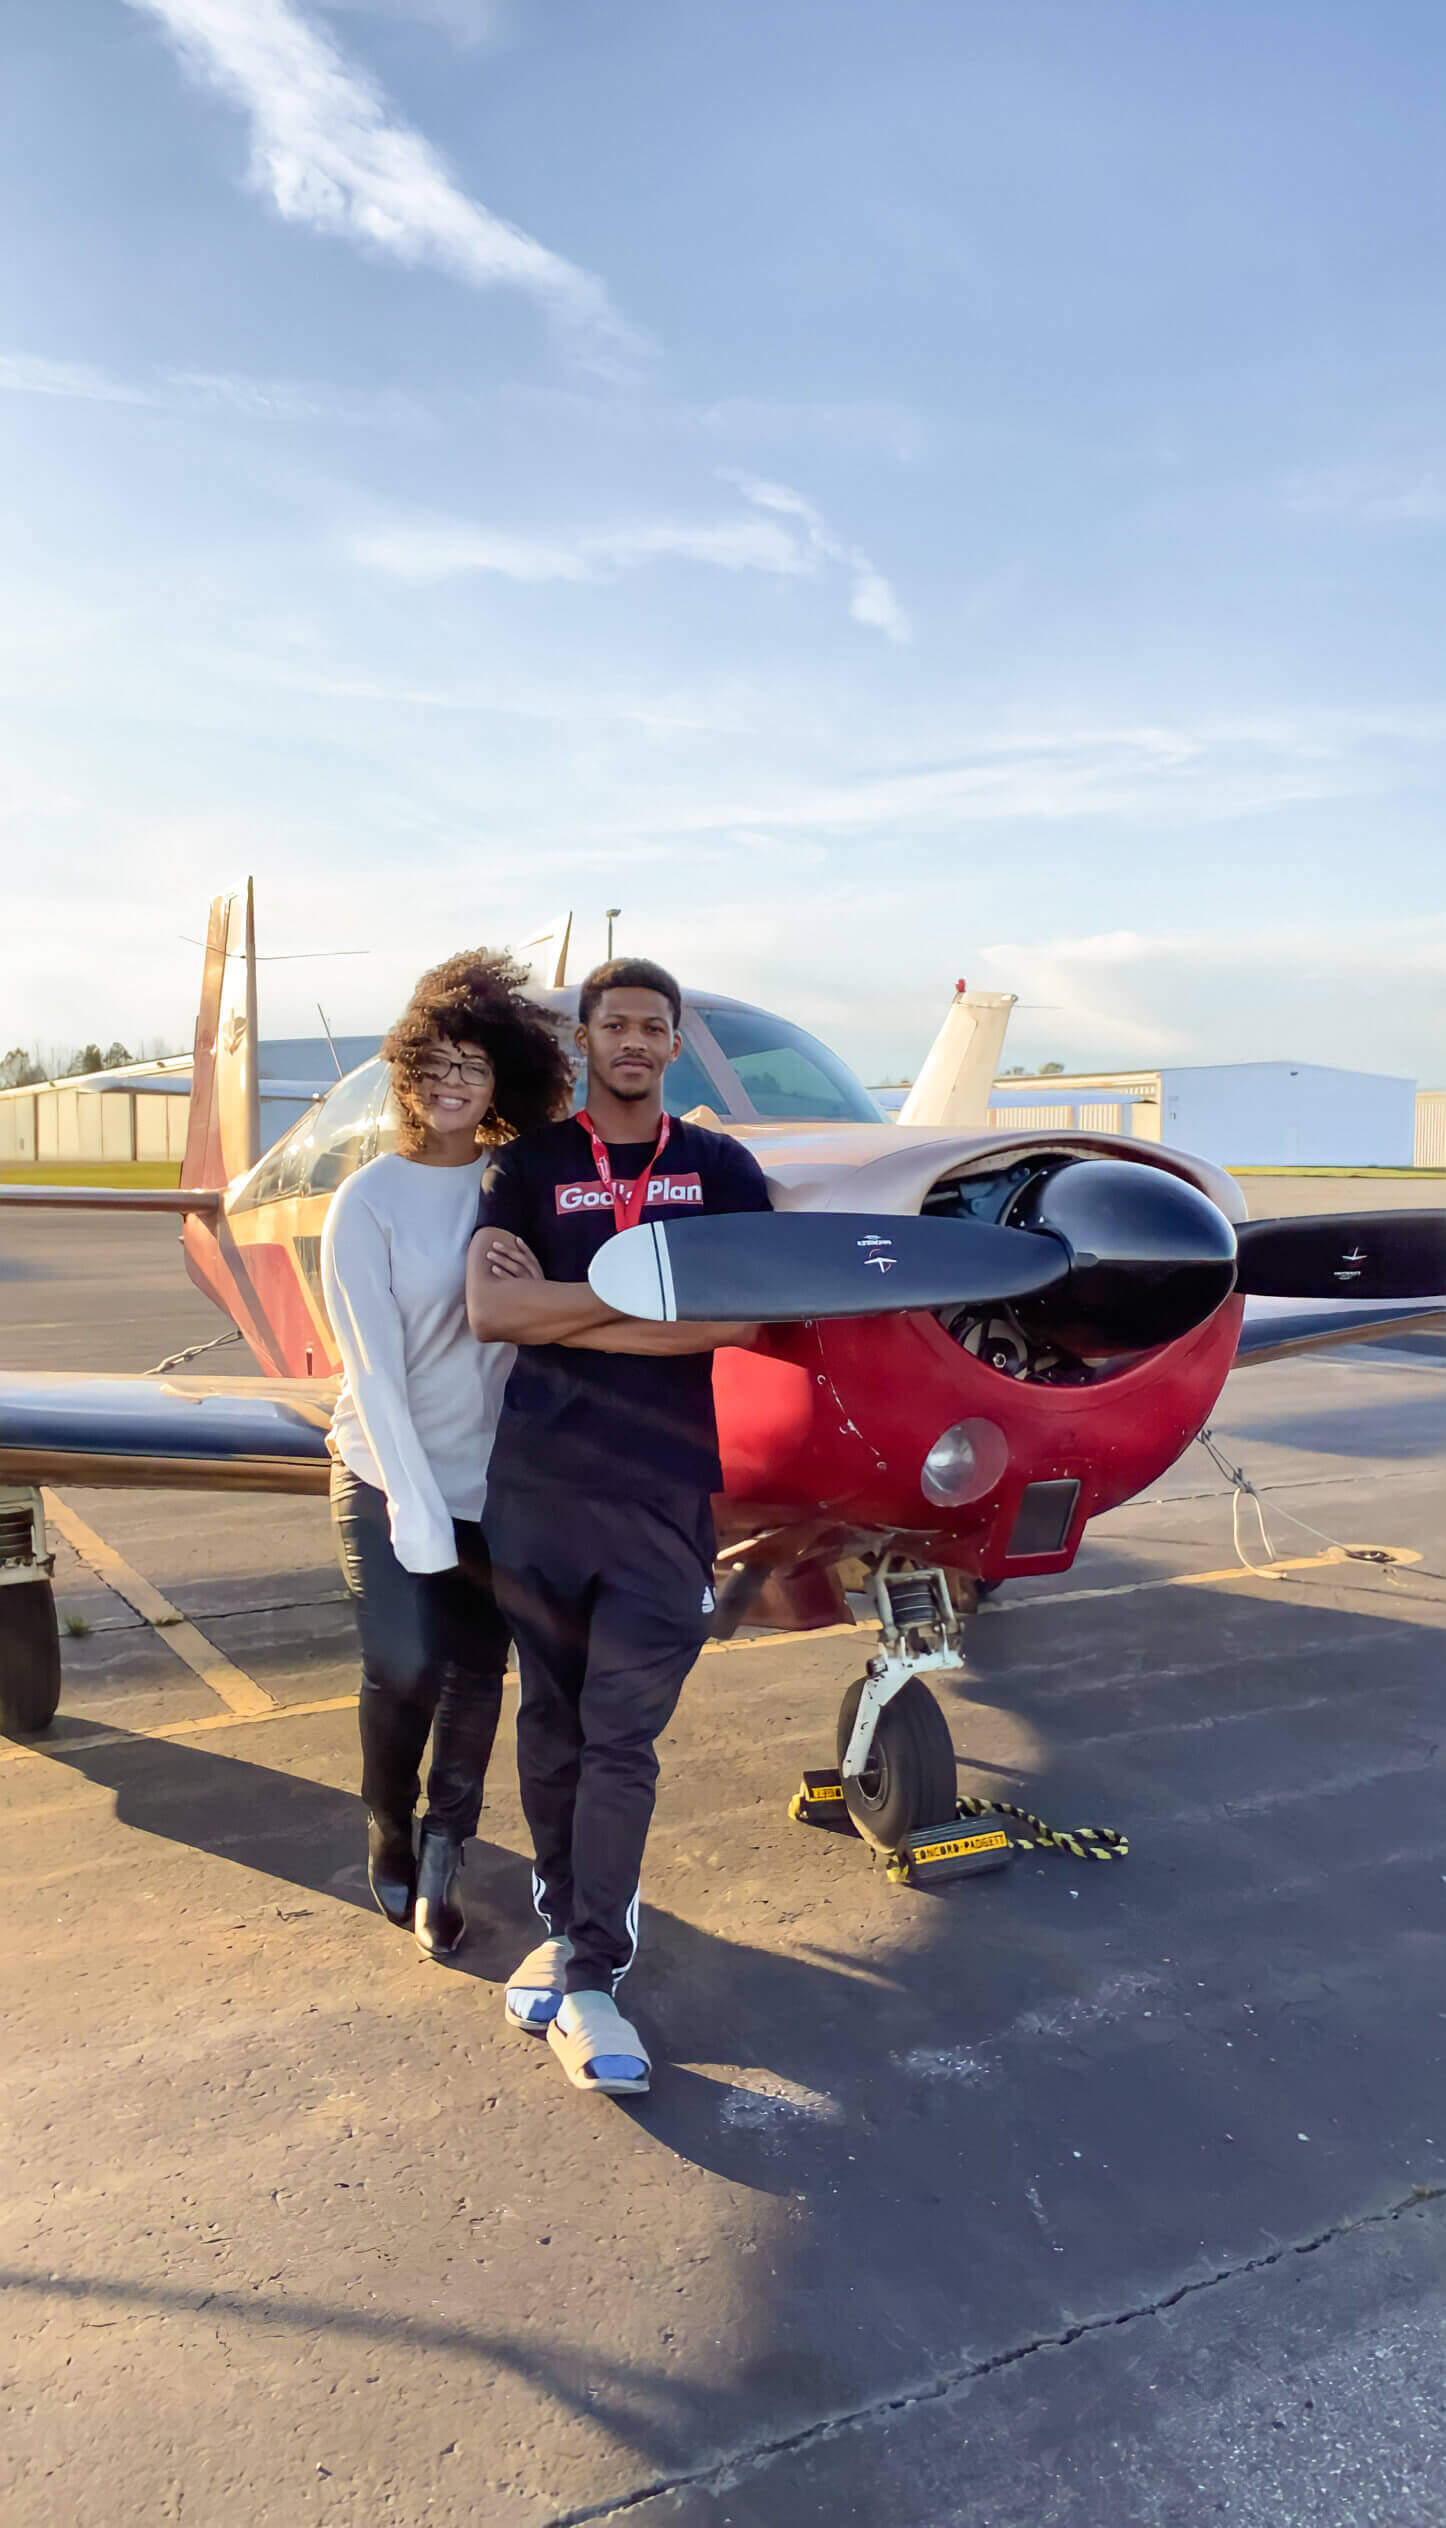 In this post, I’m sharing how my partner and I bought an airplane in our 20s! We can’t wait to share our journey and future travel plans. 